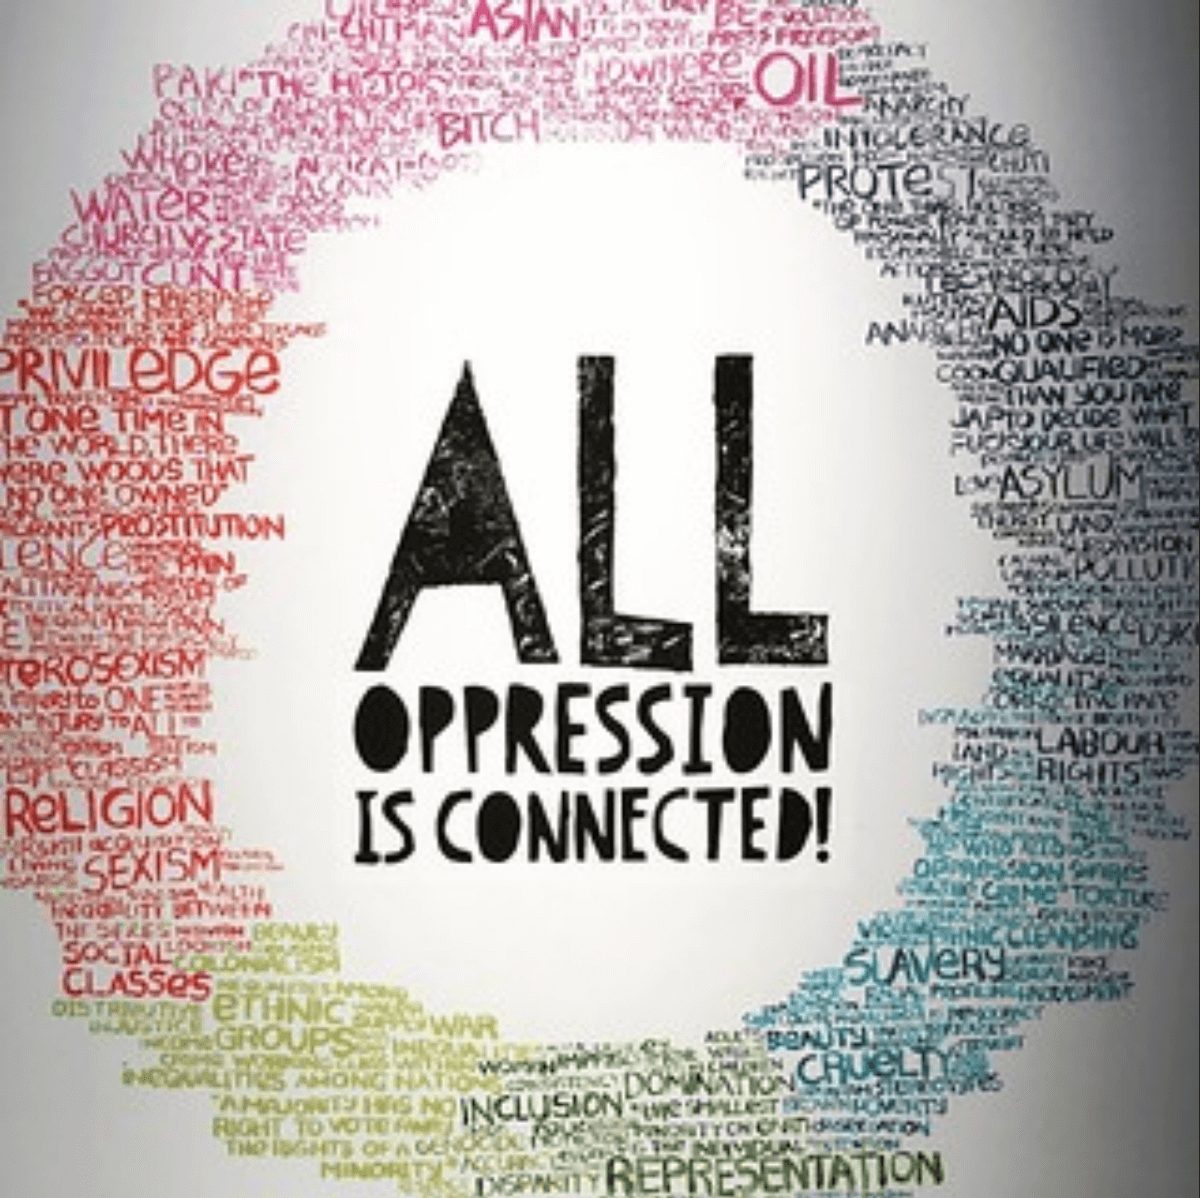 All Oppression is Connected